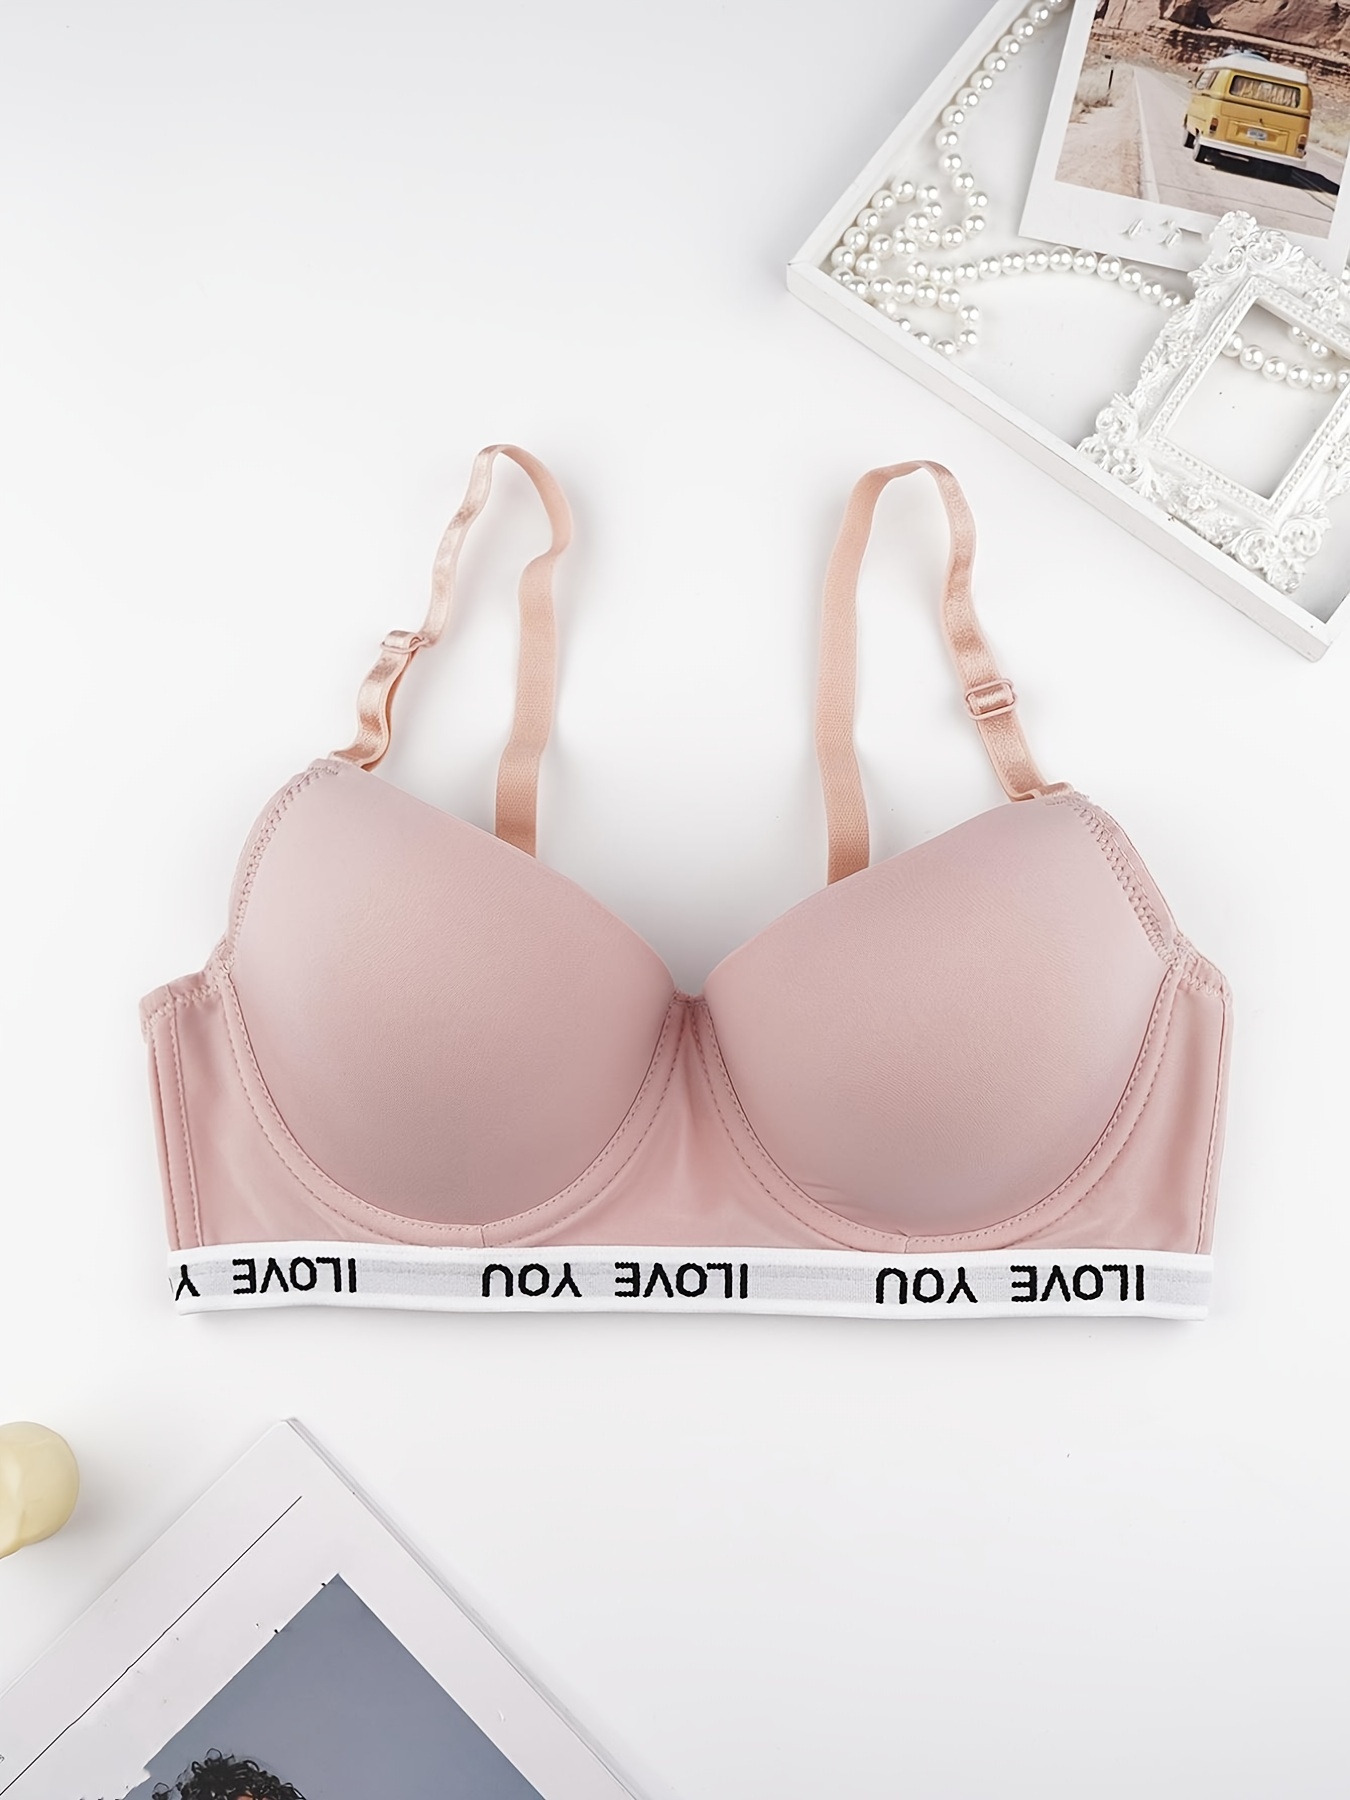 TAIAOJING Wireless Bra Seamless Bra for Women Fashionable Strapless Bra  Lace Gathered Side Closed Underwear ABC Cup Brassiere 